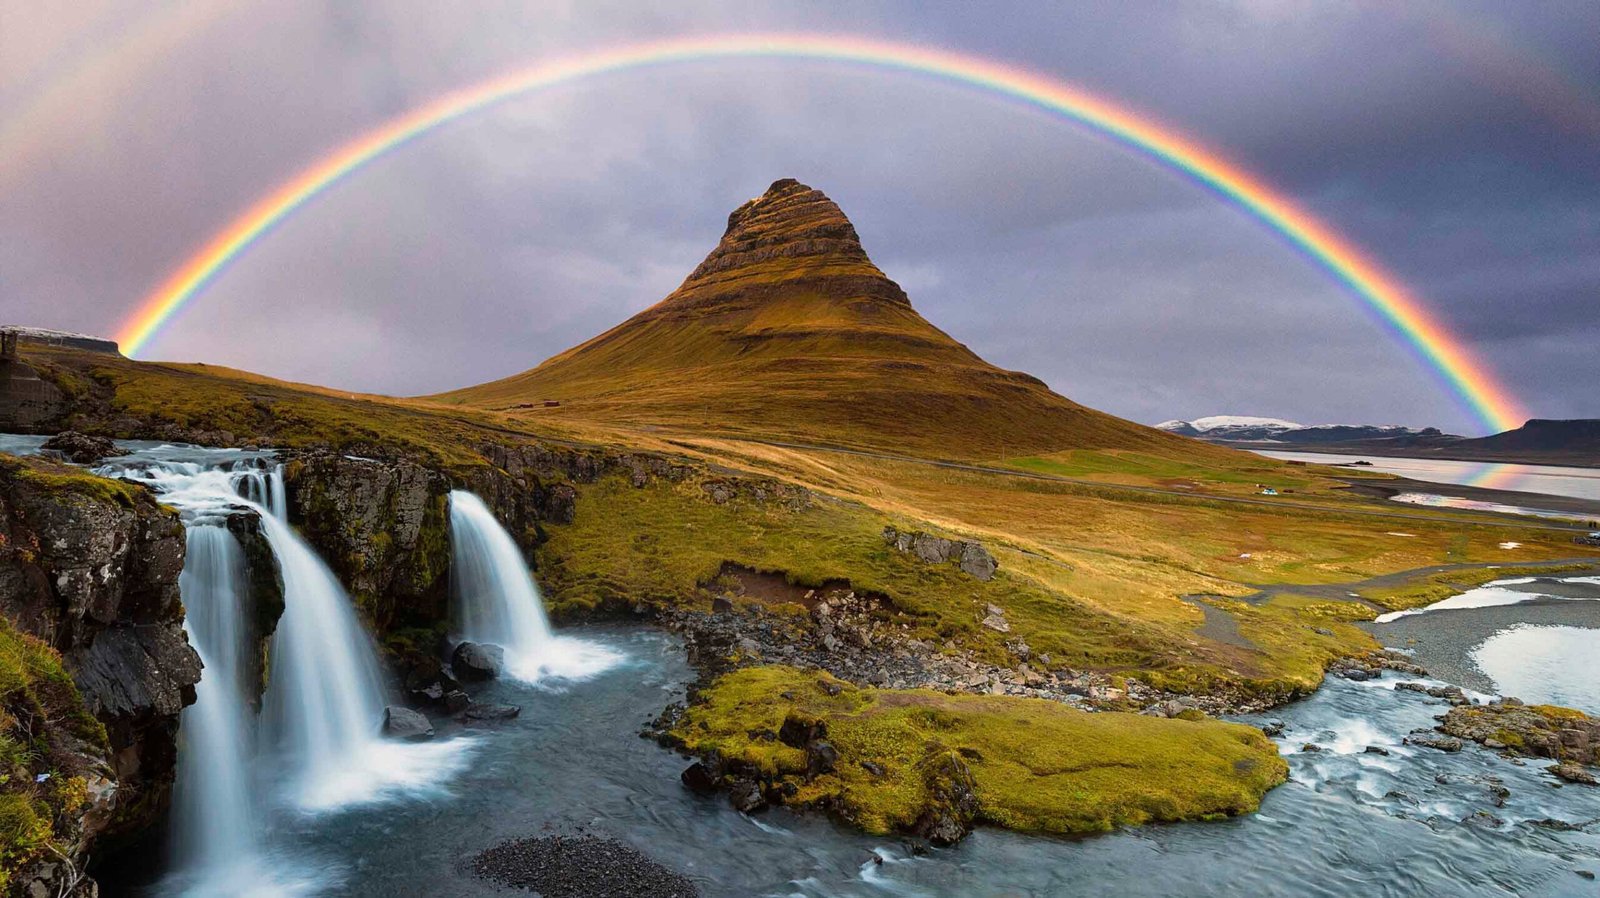 “Rainbow” comes from the Latin arcus pluvius, meaning “rainy arch.”